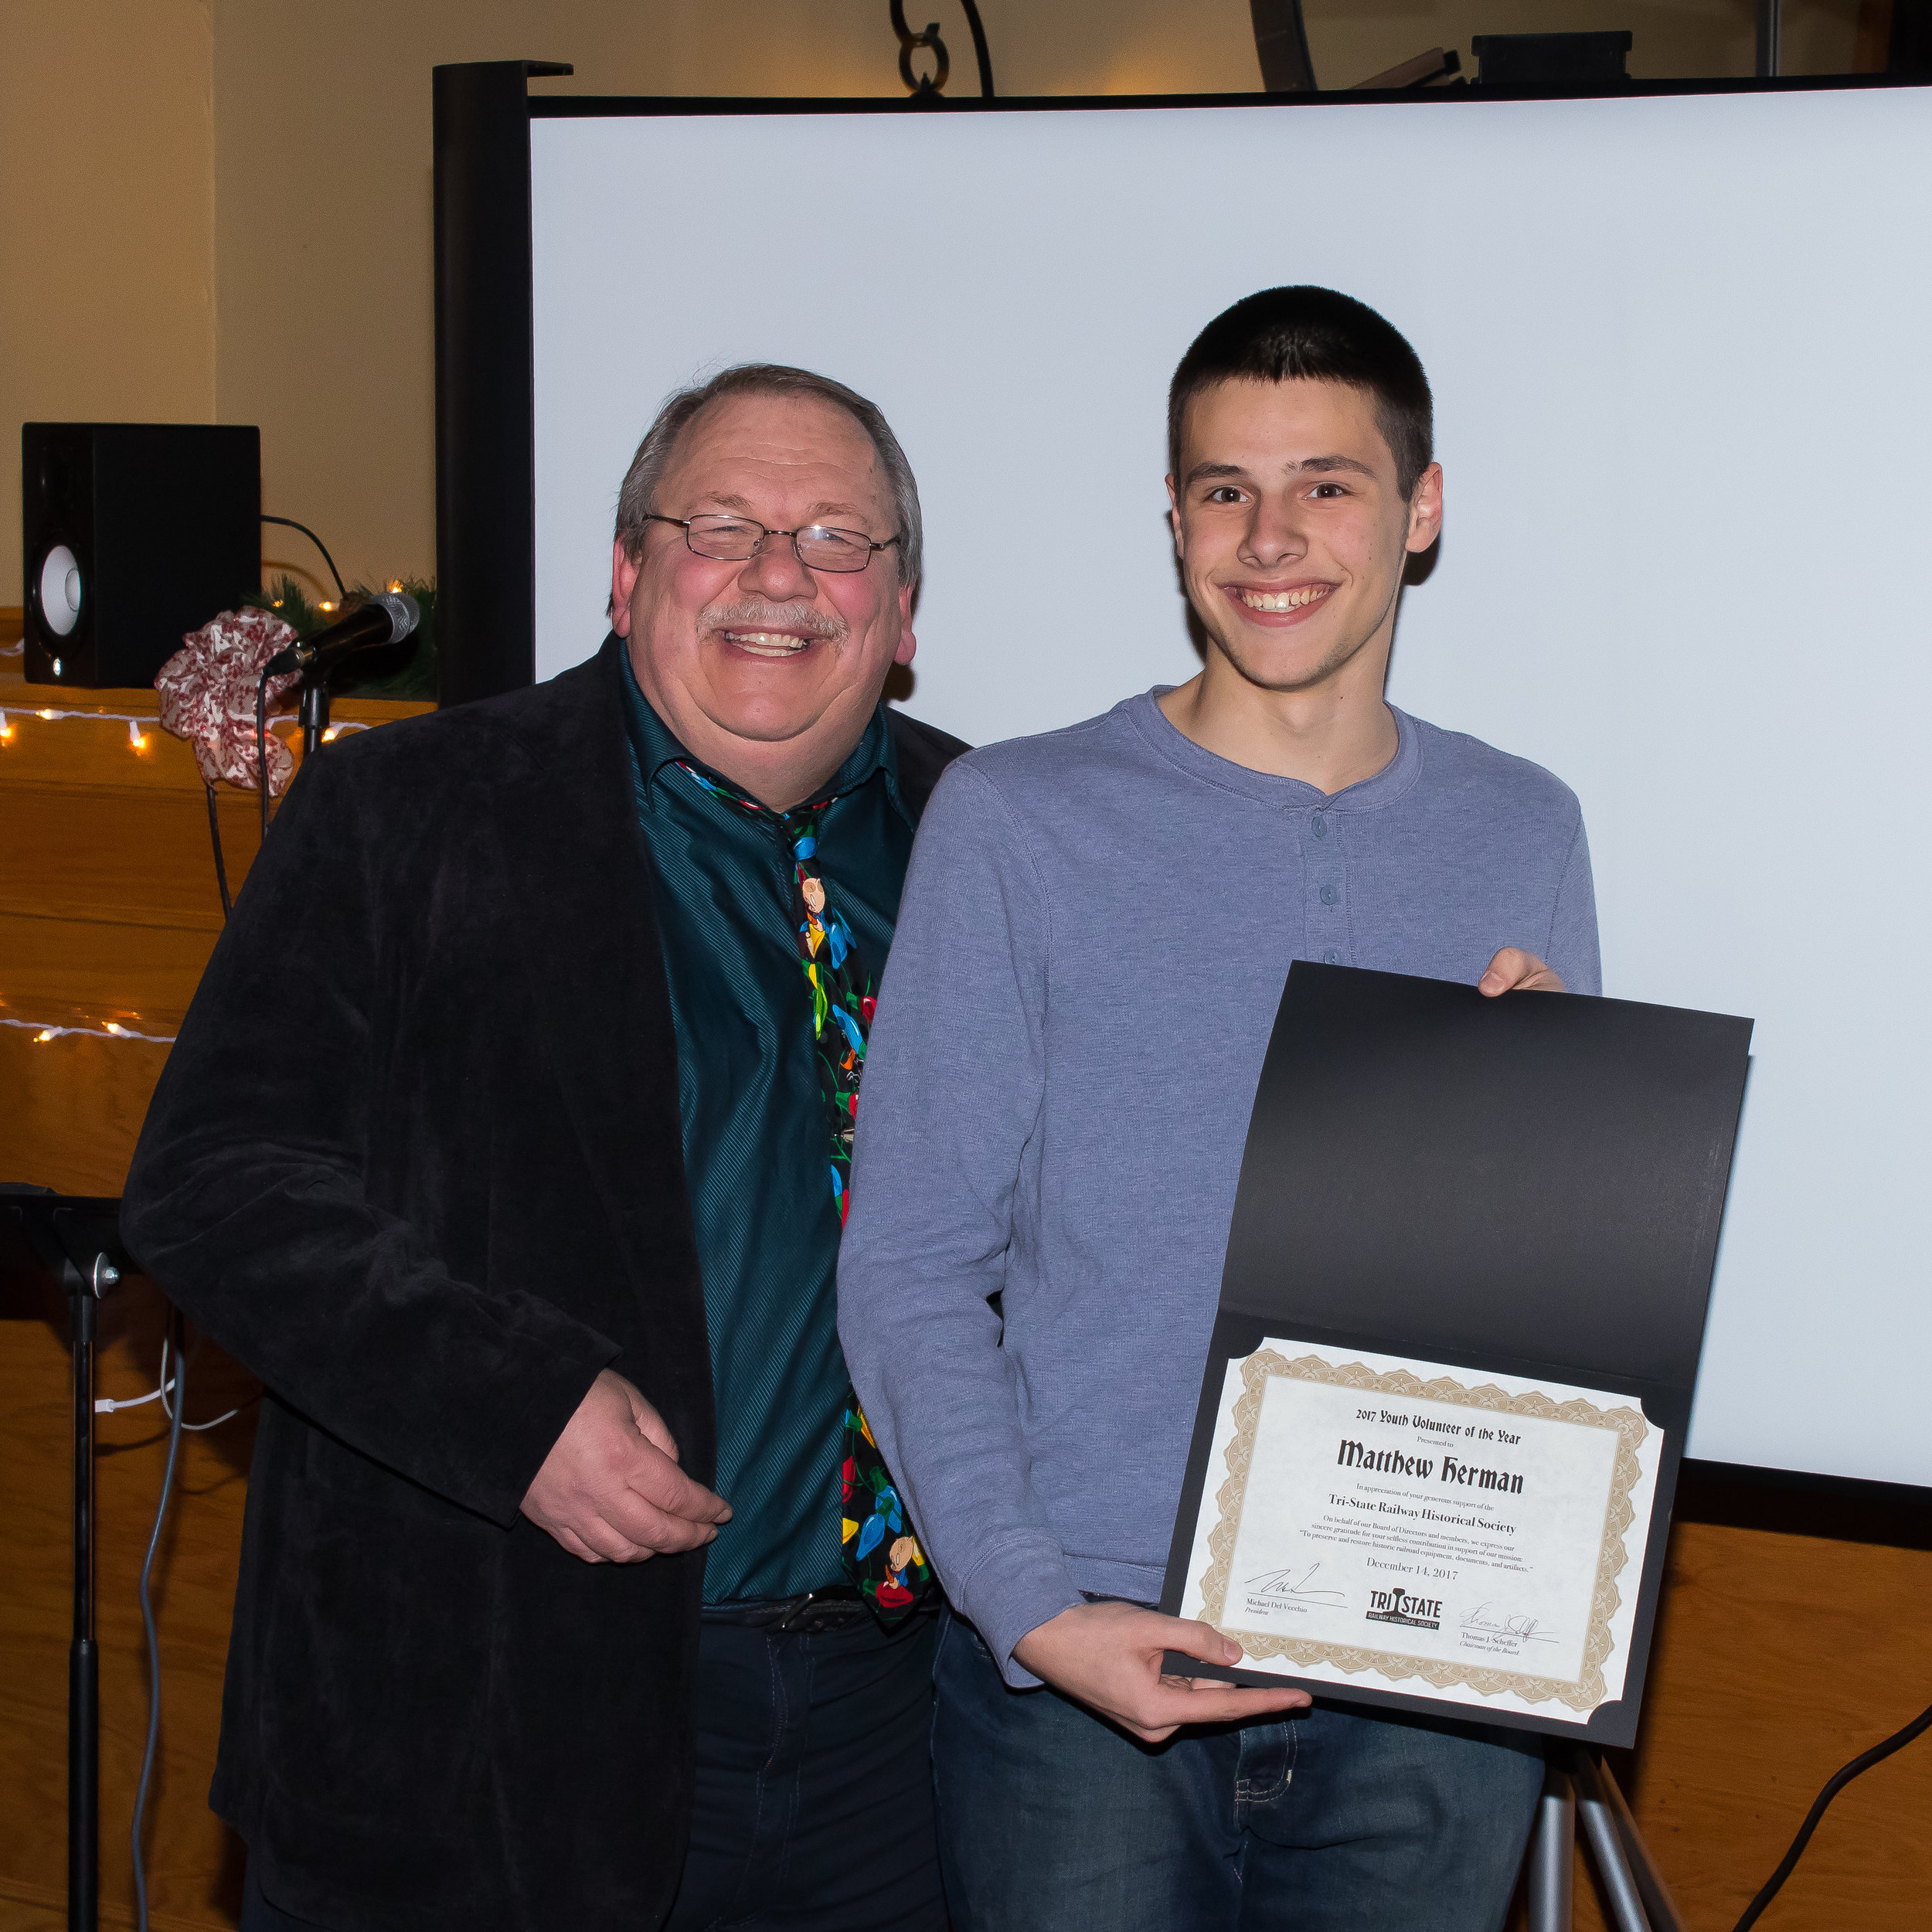  President Michael Del Vecchio with presenting member Matthew Herman with the "Youth Volunteer of the Year" Award 